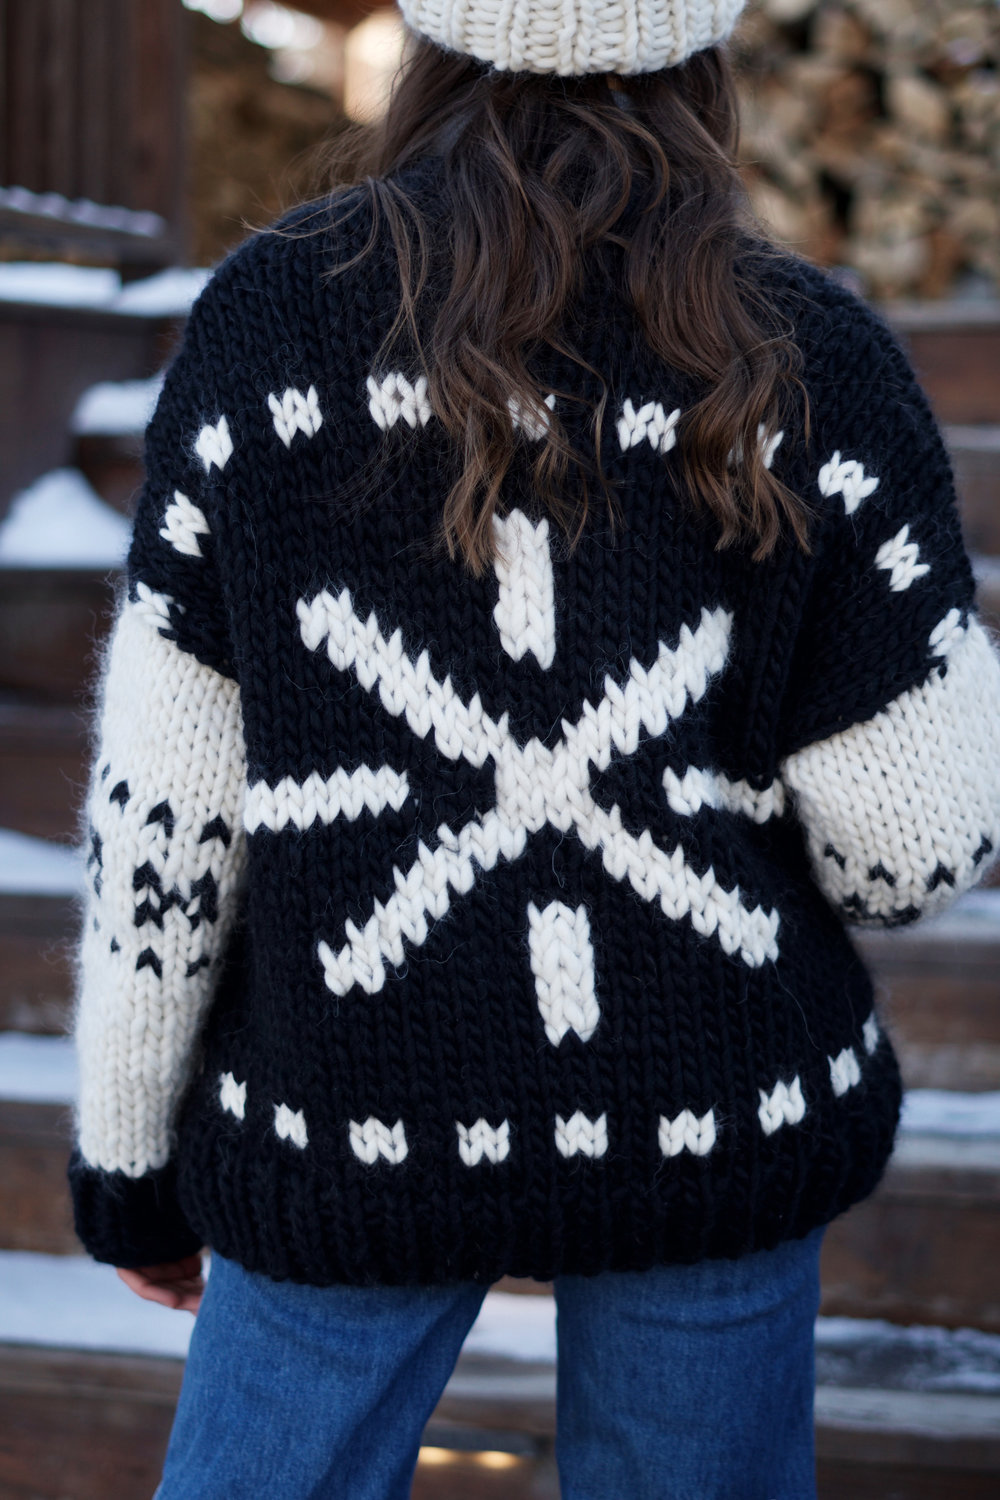 Avalanche Sweater Coat pattern by Two of Wands